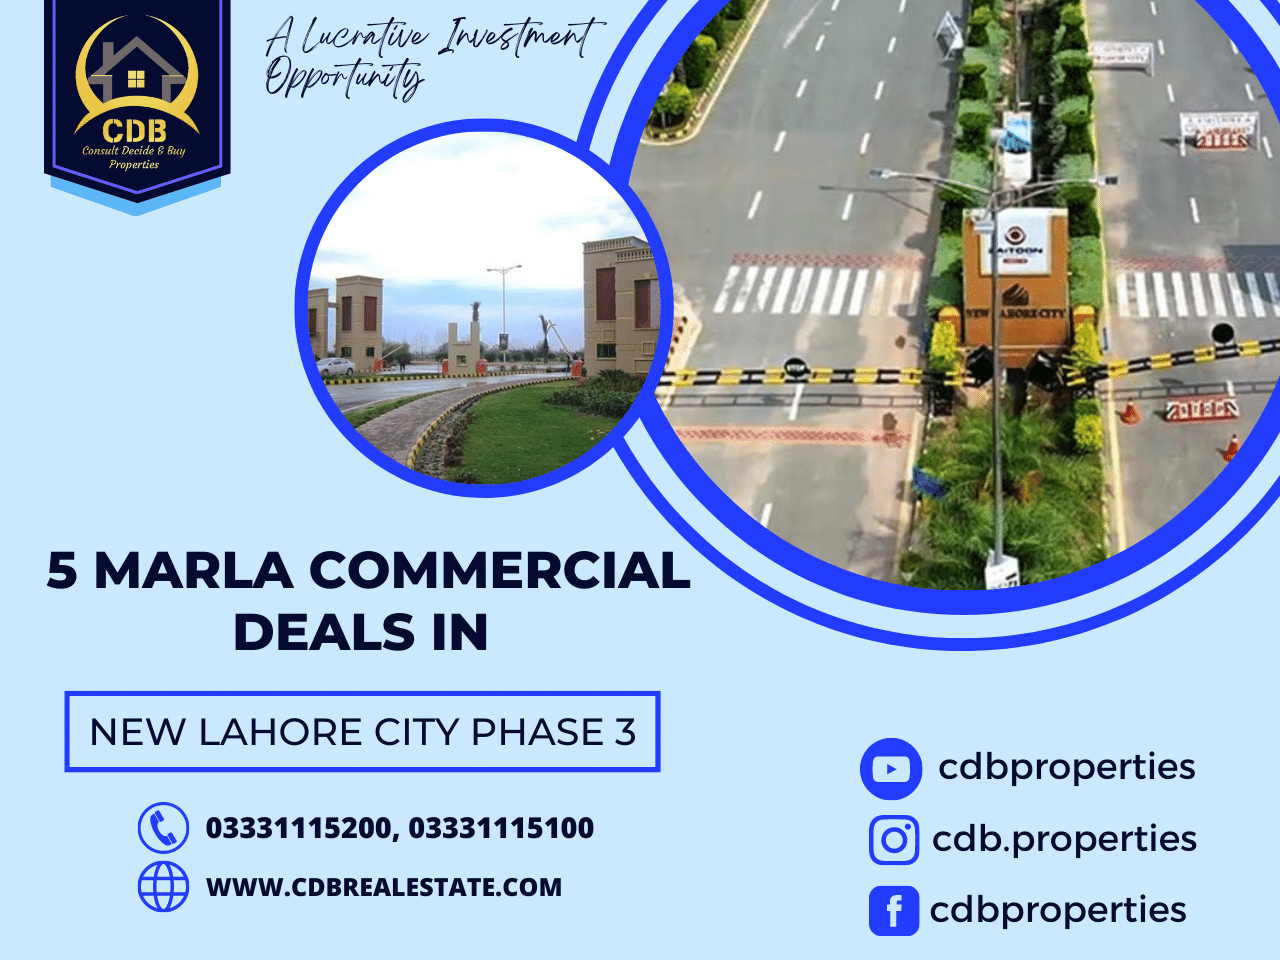 5 Marla Commercial Deals in New Lahore